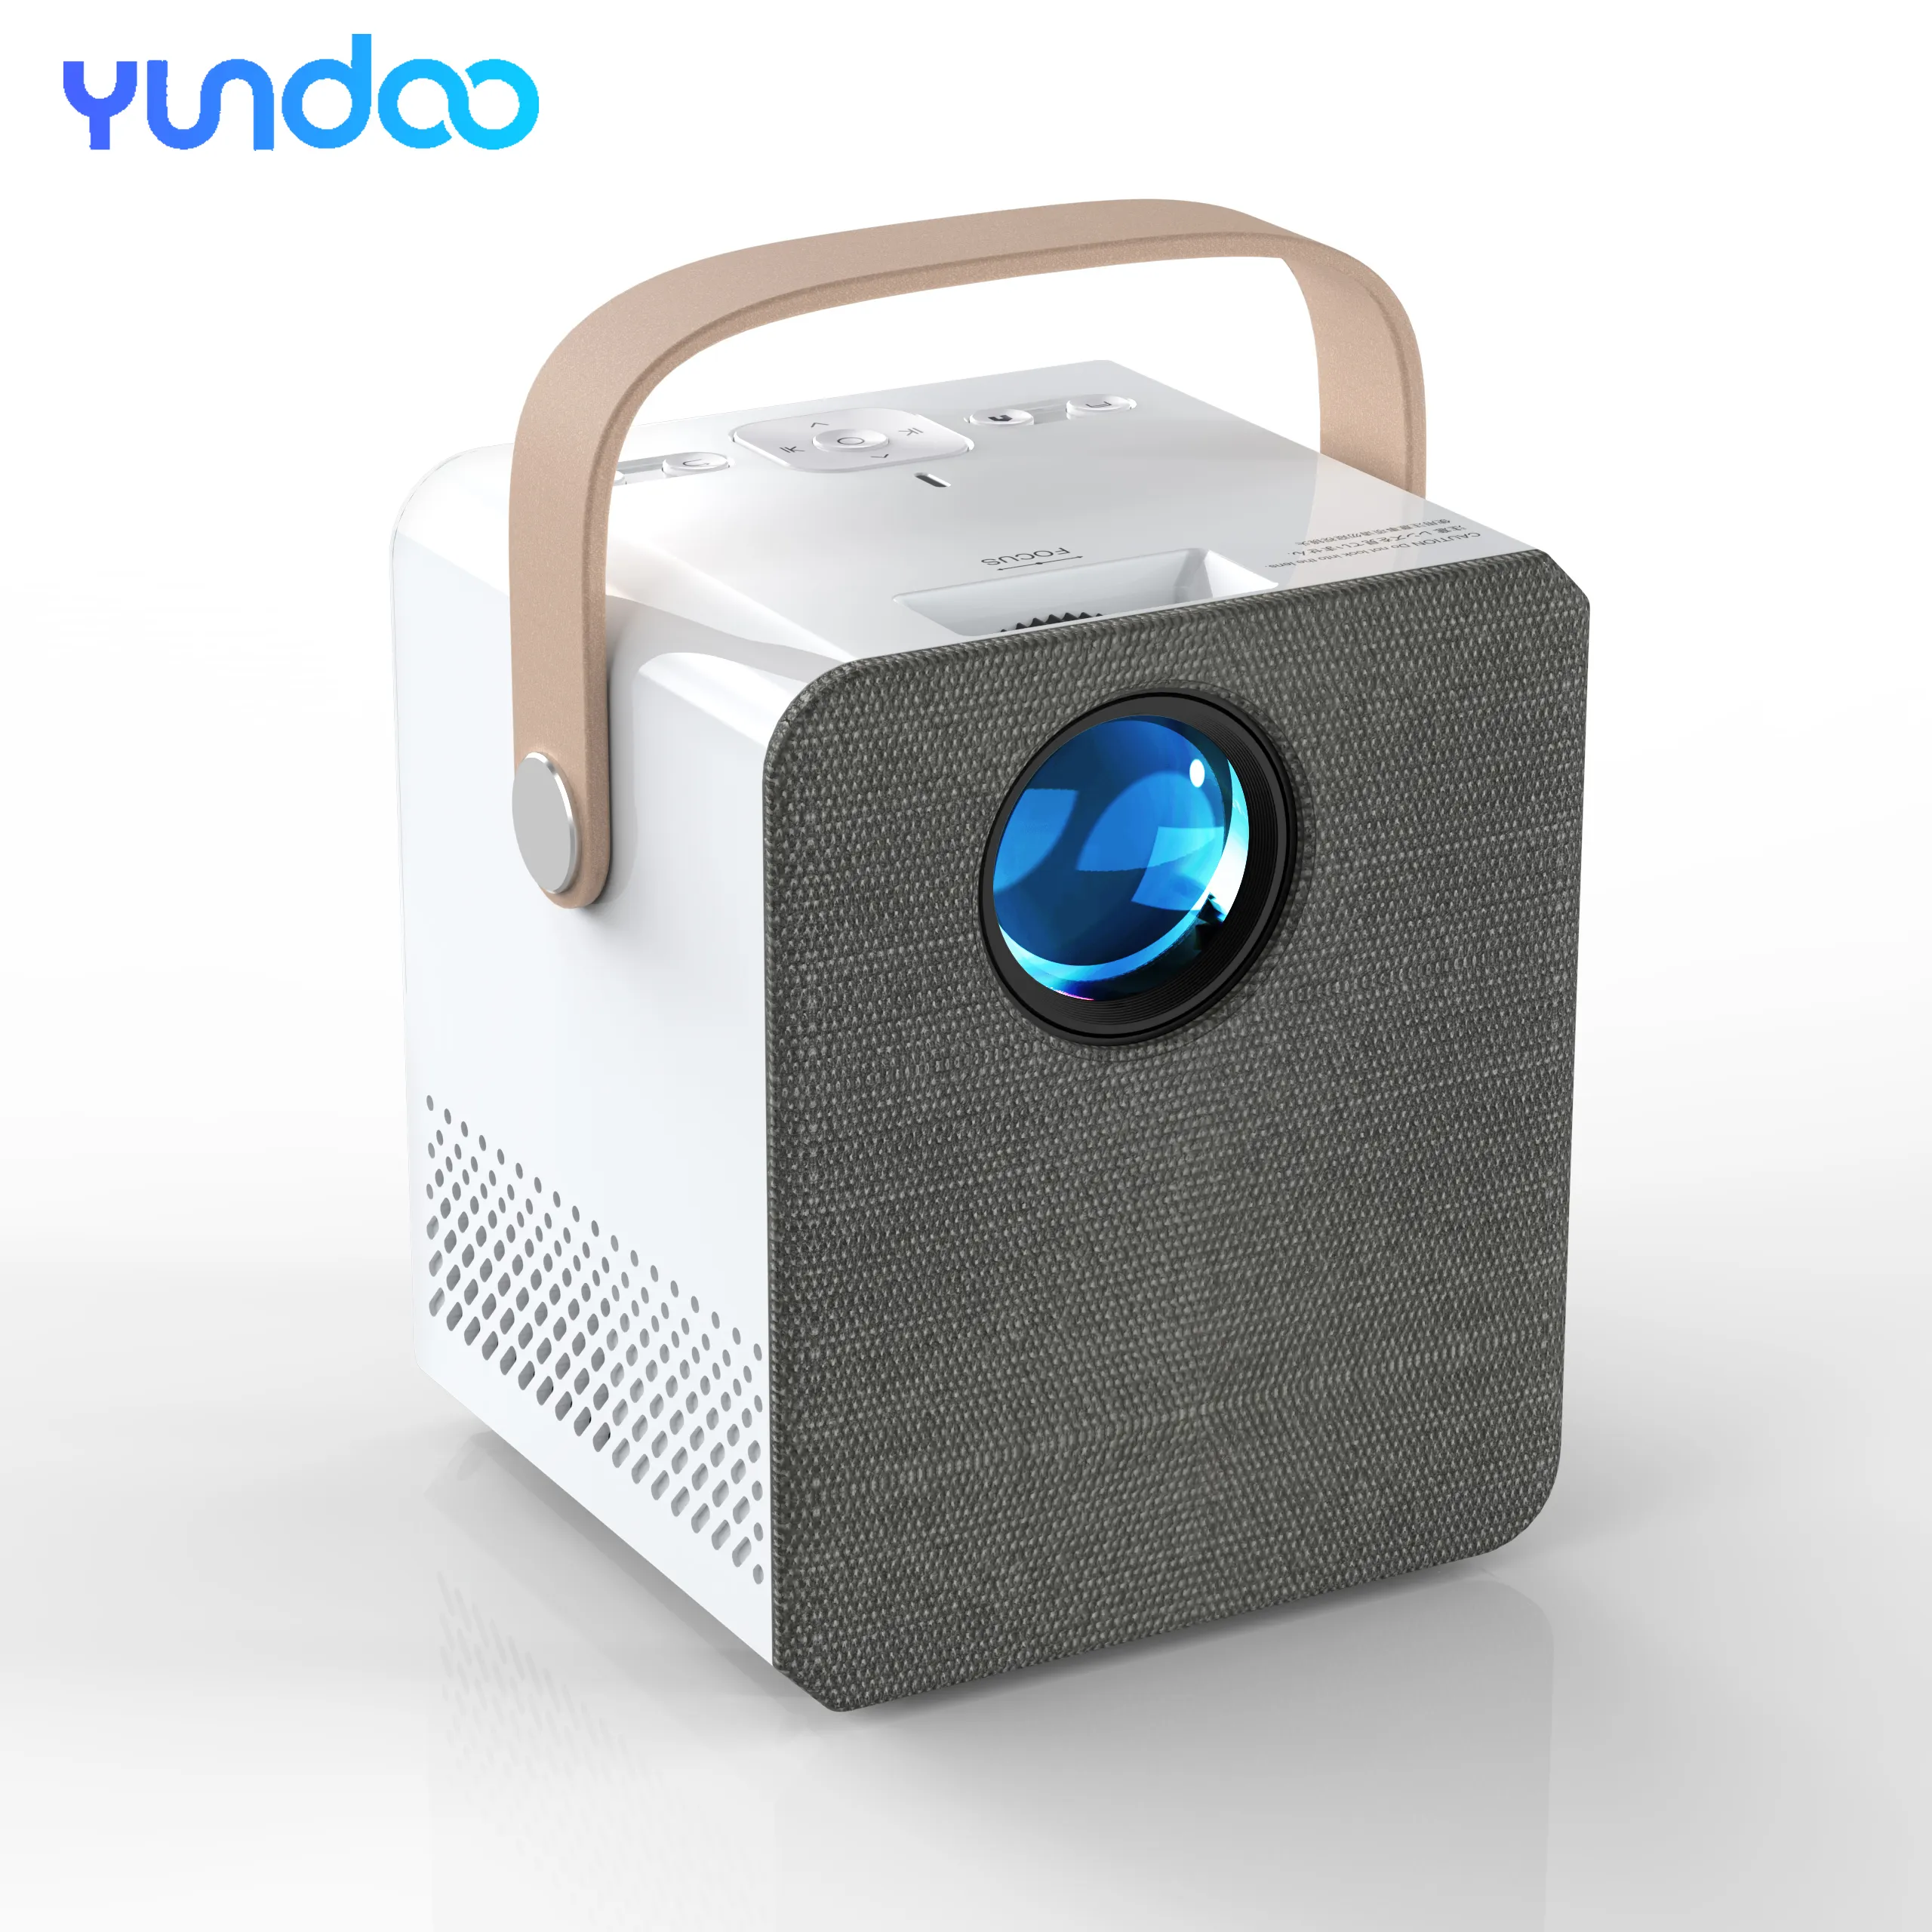 YUNDOO CY303 Mini 1080P Portable Projector--Native 1080P Full HD LED LCD Video 4K Home Theater Android Projector Beamer